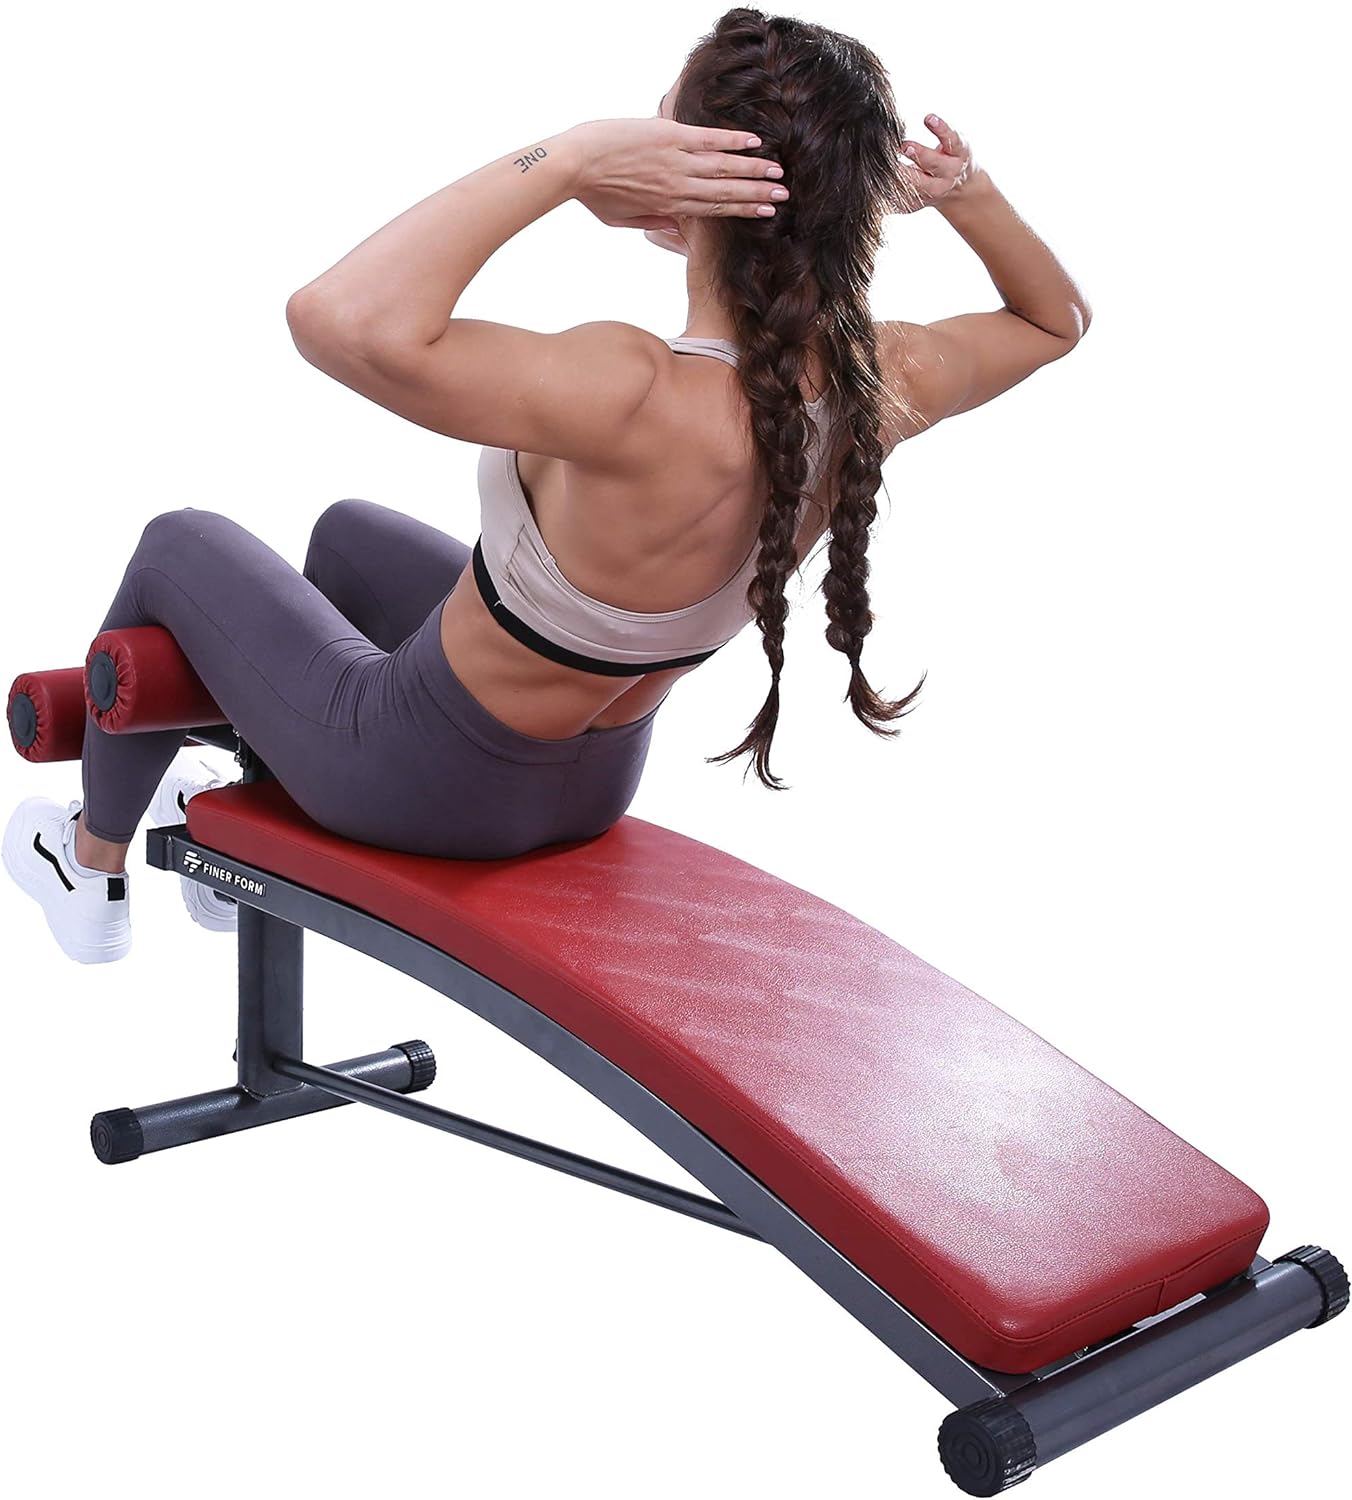 Finer Form Gym-Quality Sit Up Bench with Reverse Crunch Handle Review